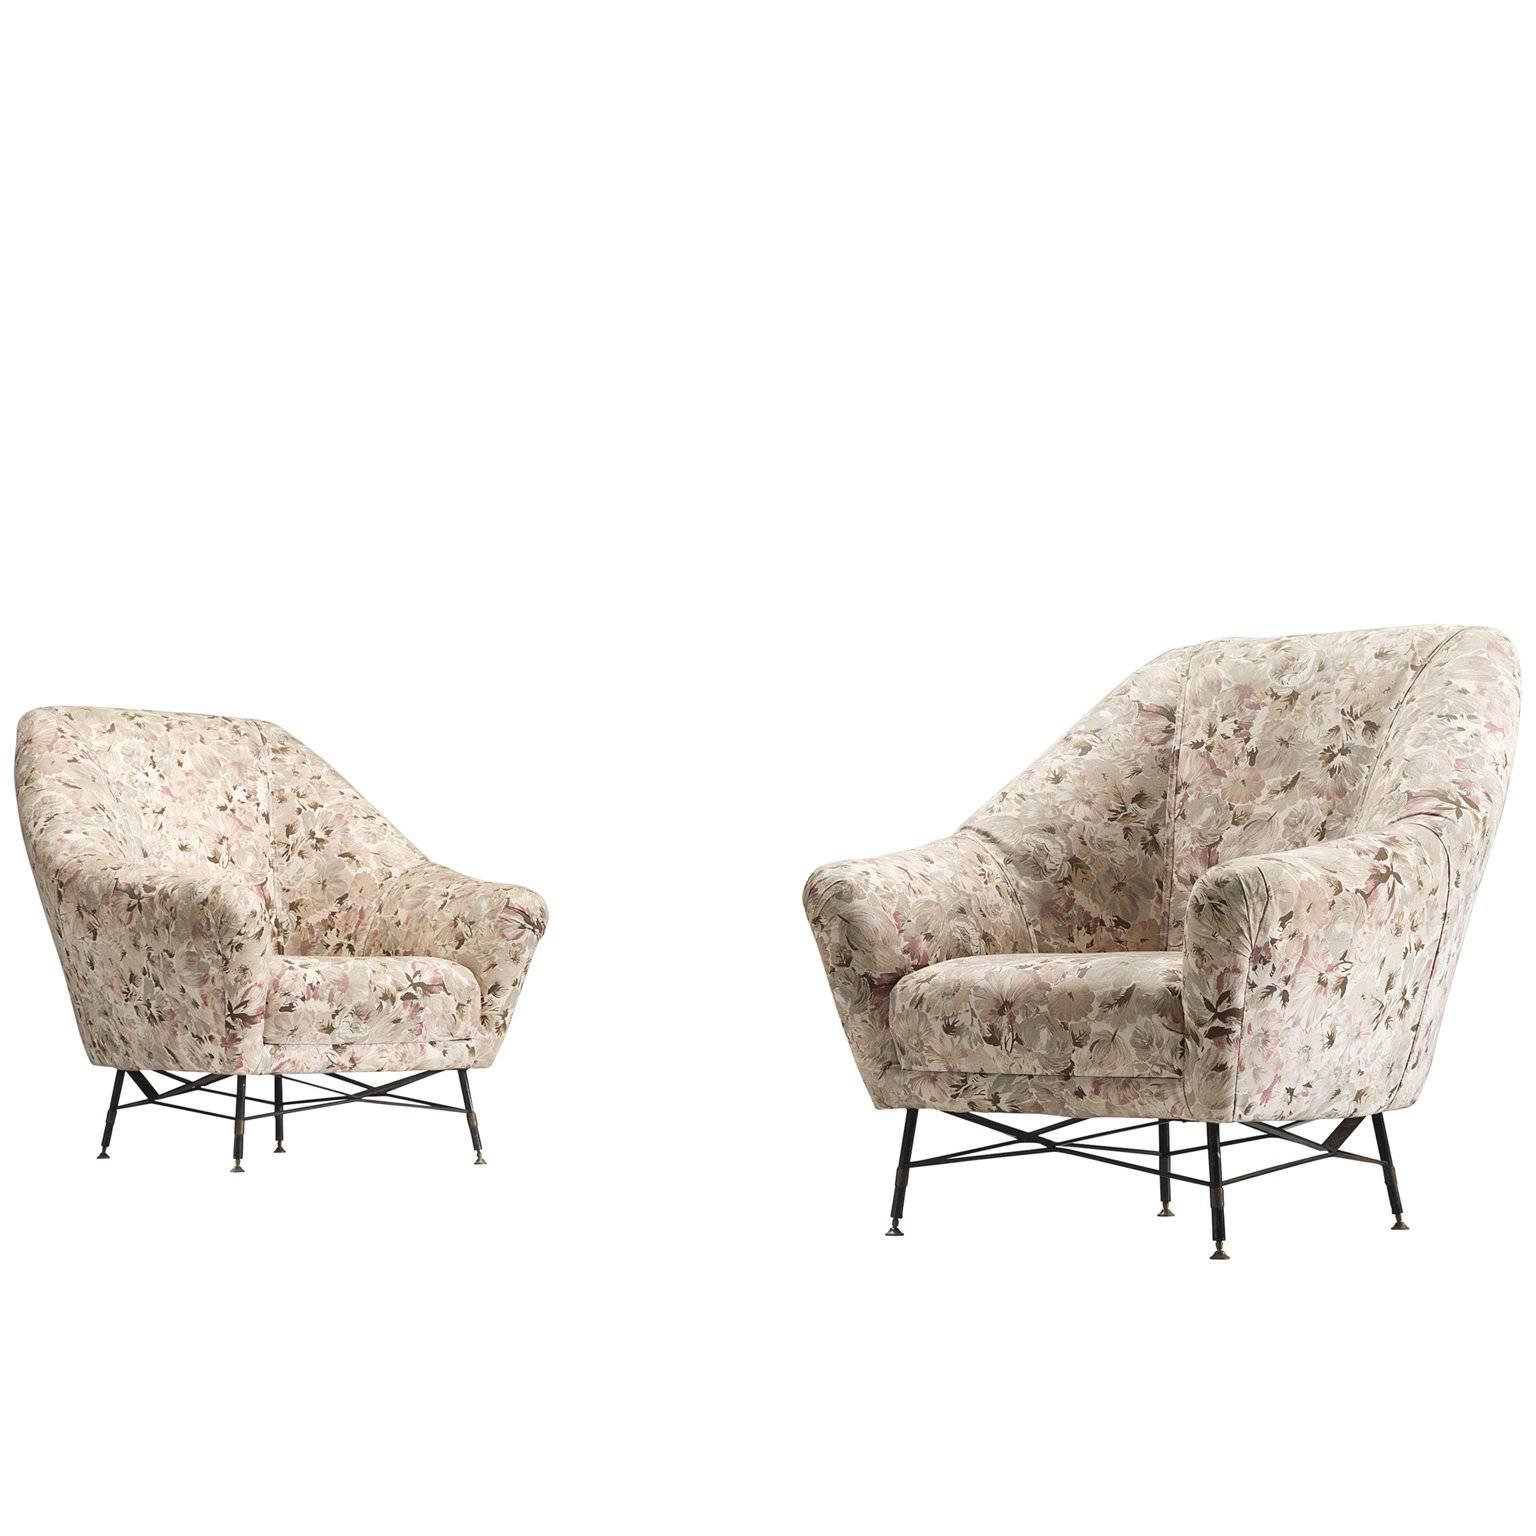 Italian Set of Lounge Chairs with Floral Upholstery